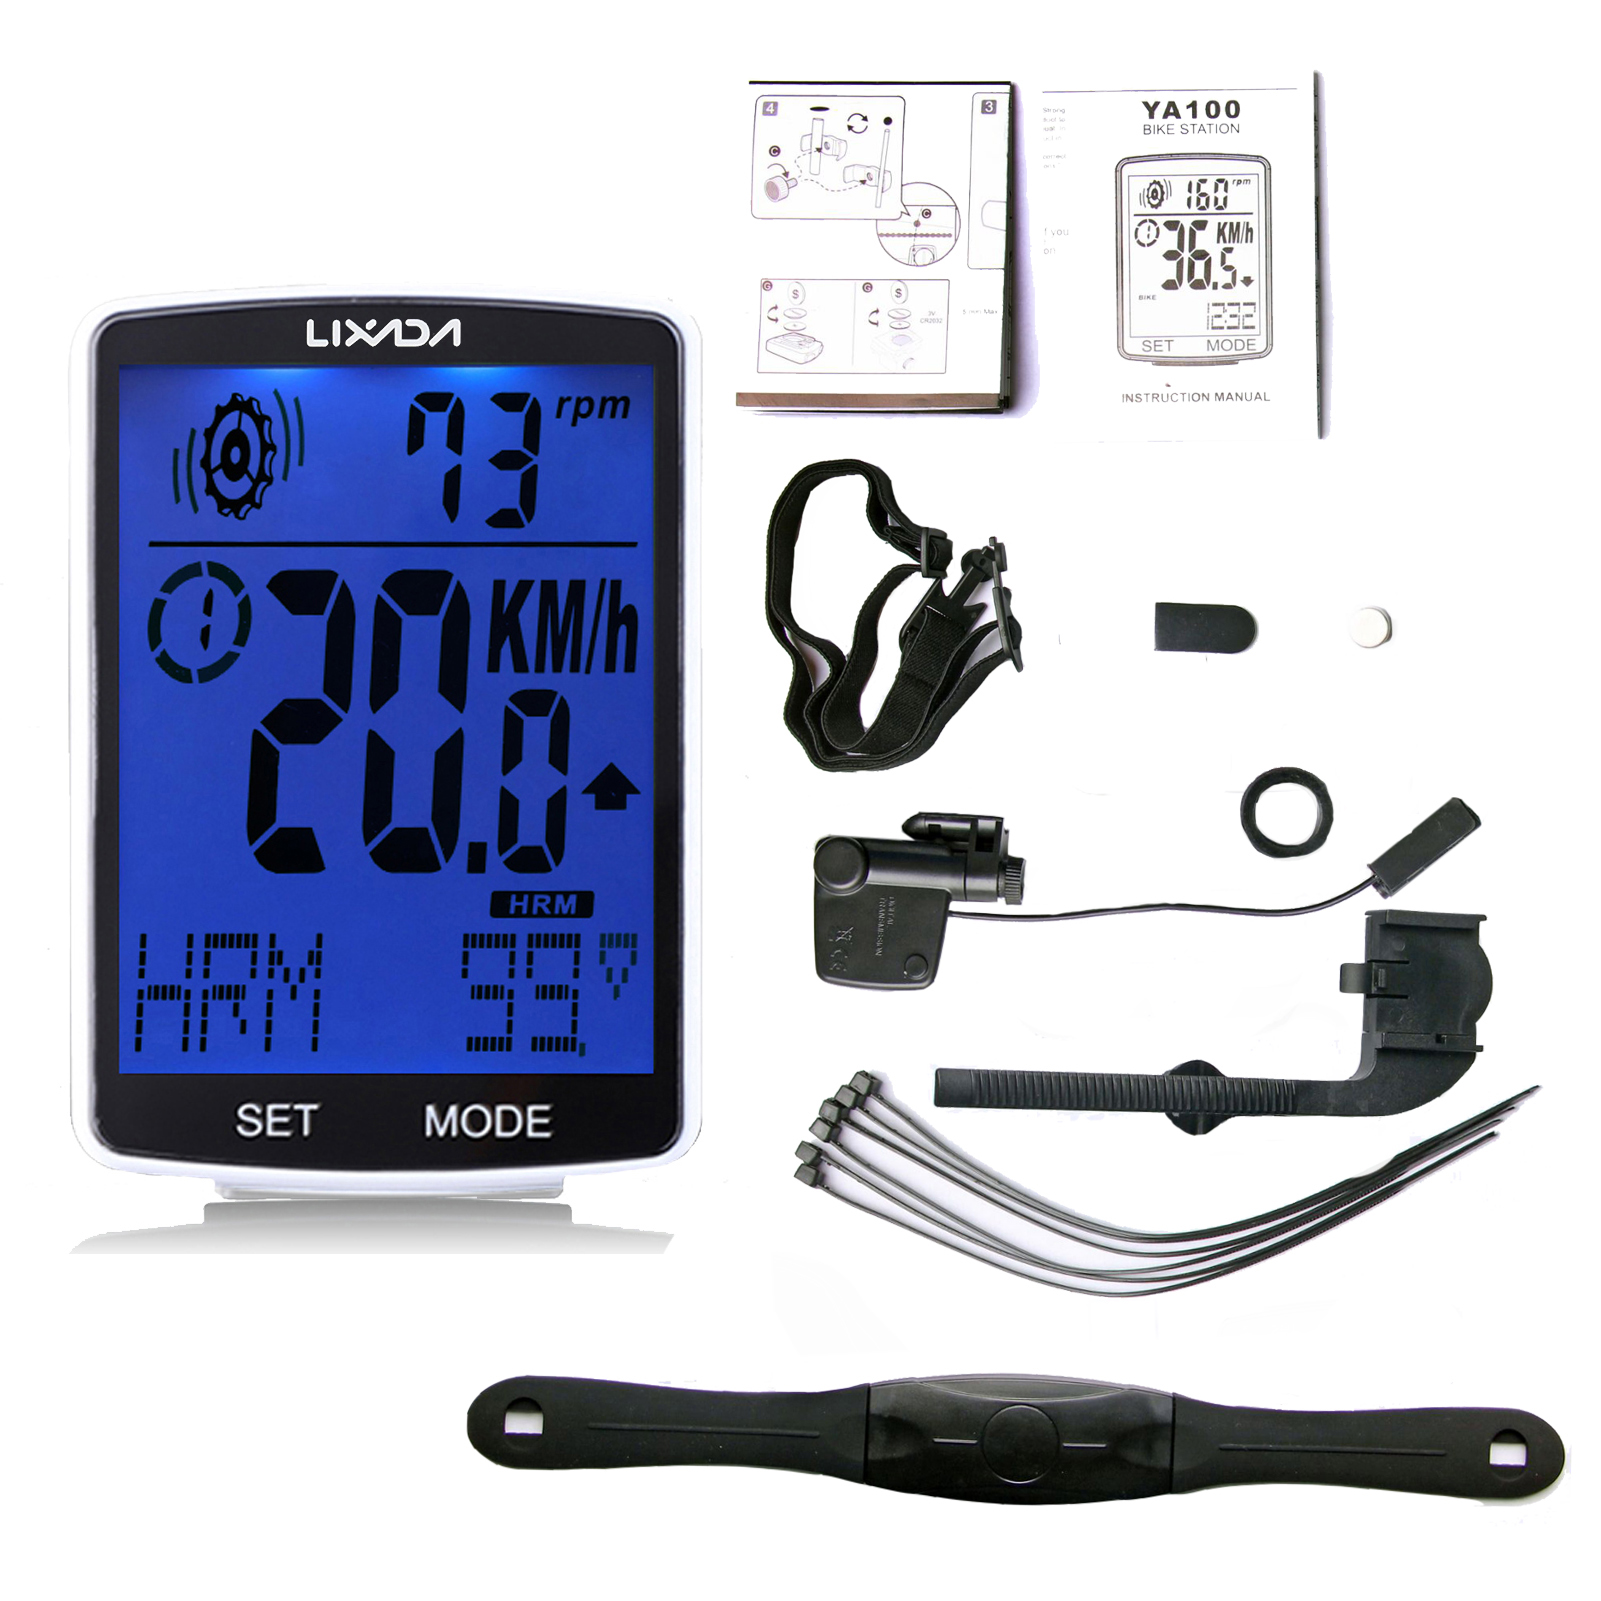 LIXADA 3 in 1 Wireless Bike Computer Multi Functional LCD Screen Bicycle Computer with Heart Rate Sensor Mountain Bike Speedometer Odometer IPX7 Waterproof Cycling Measurable Temperature Sto - image 1 of 7